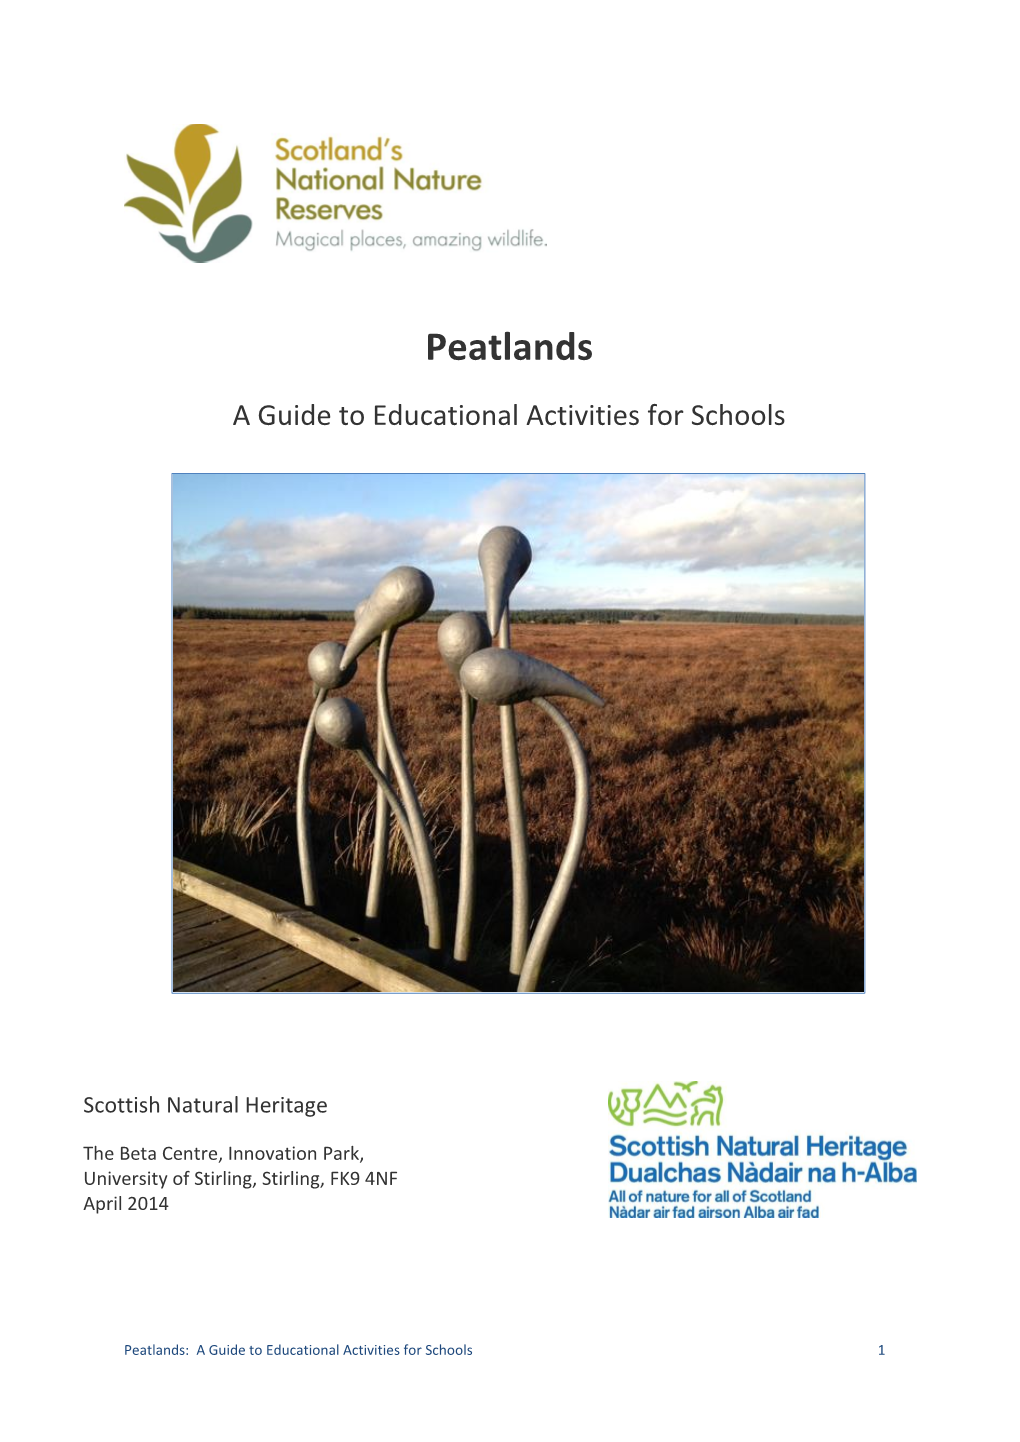 Peatlands – a Guide to Educational Activities for Schools